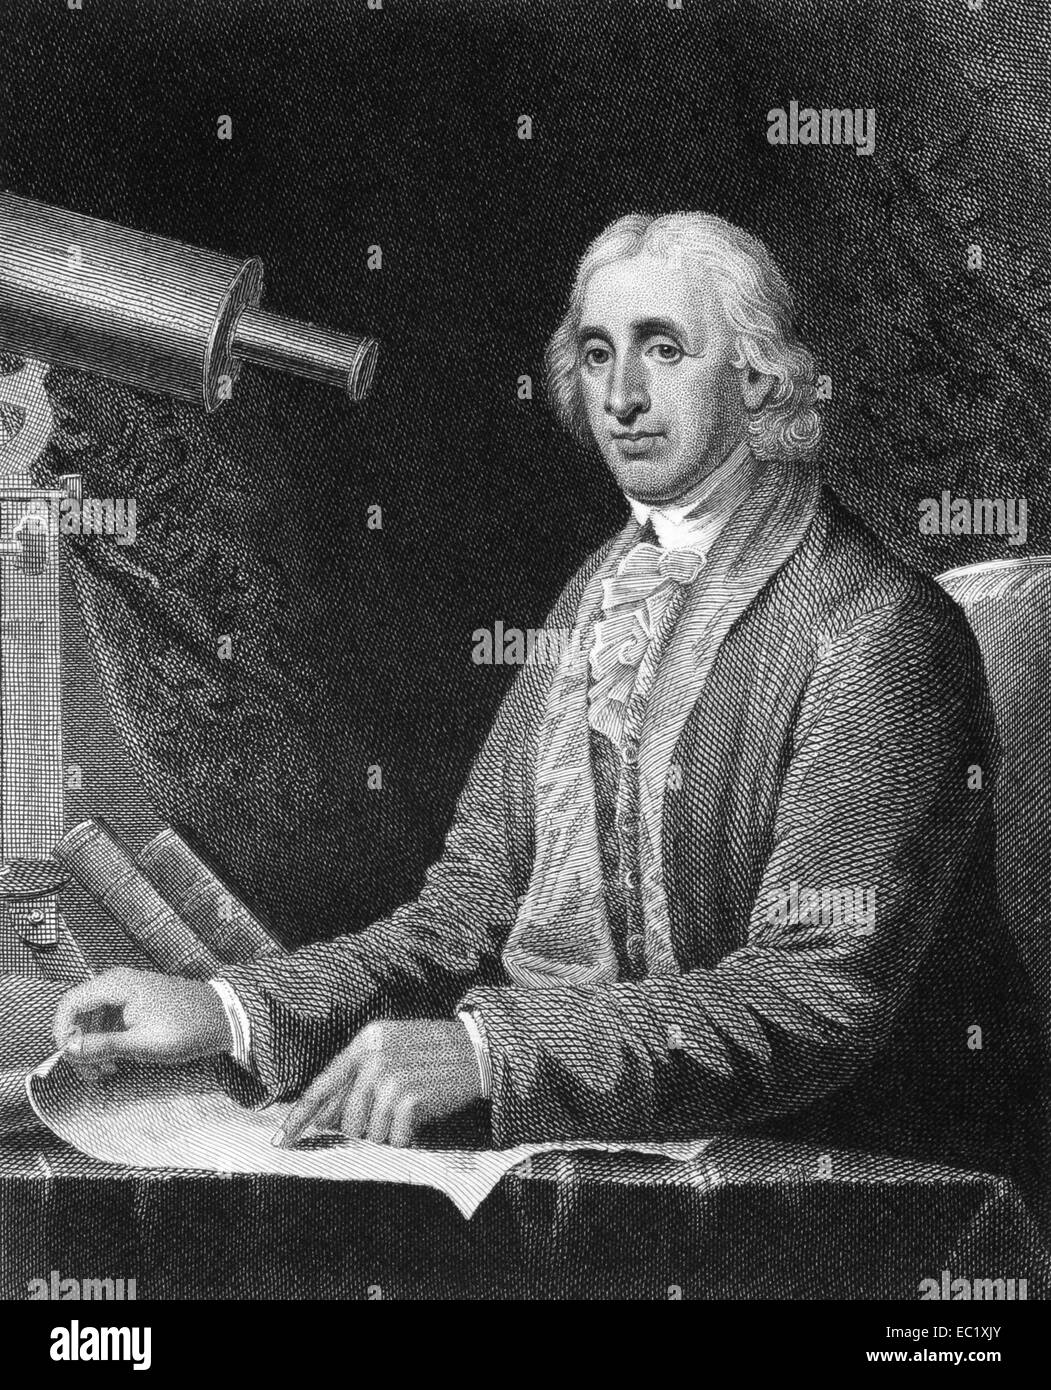 David Rittenhouse (1732-1796) on engraving from 1835. American astronomer, inventor, clockmaker, mathematician and surveyor. Stock Photo